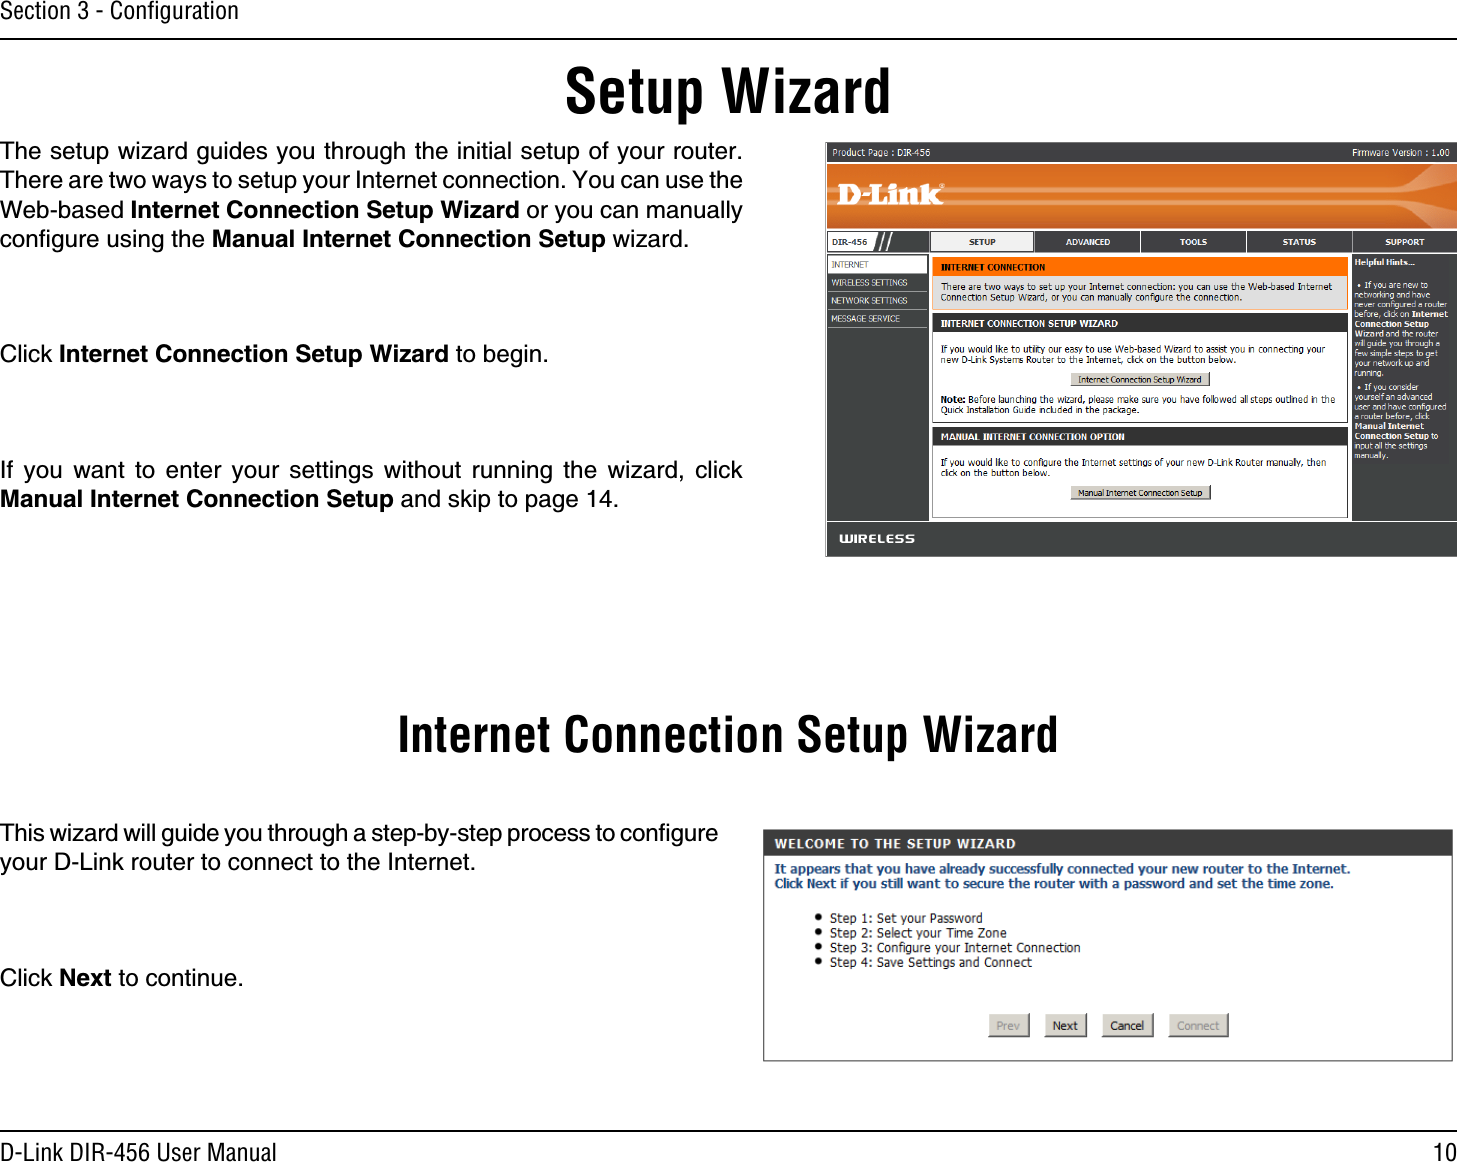 10D-Link DIR-456 User ManualSection 3 - ConﬁgurationSetup WizardThe setup wizard guides you through the initial setup of your router. There are two ways to setup your Internet connection. You can use the Web-based Internet Connection Setup Wizard or you can manually conﬁgure using the Manual Internet Connection Setup wizard.Click Internet Connection Setup Wizard to begin.If you want to enter your settings without running the wizard, click Manual Internet Connection Setup and skip to page 14.This wizard will guide you through a step-by-step process to conﬁgure your D-Link router to connect to the Internet.Click Next to continue.Internet Connection Setup Wizard